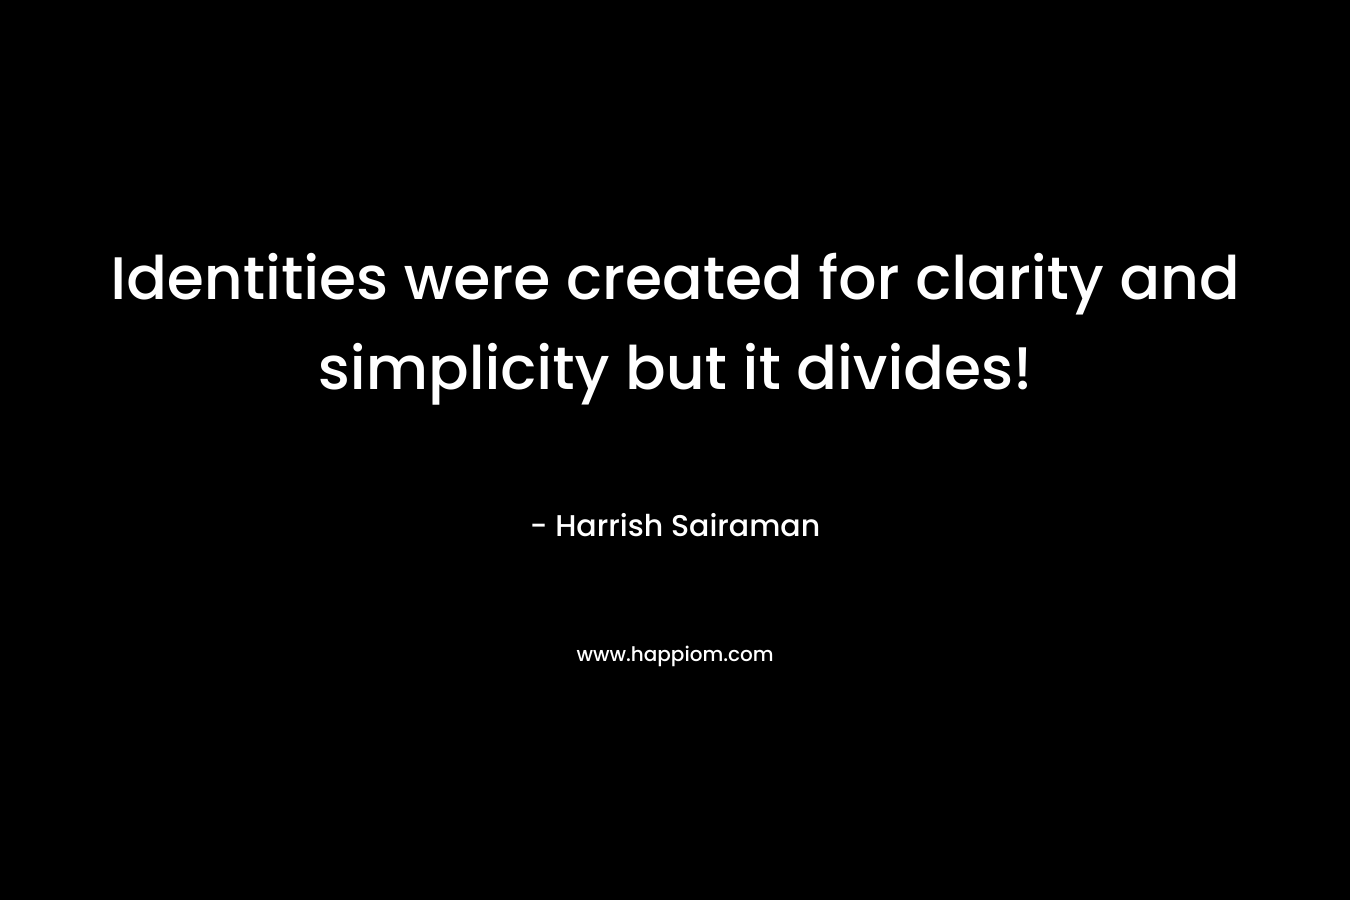 Identities were created for clarity and simplicity but it divides!